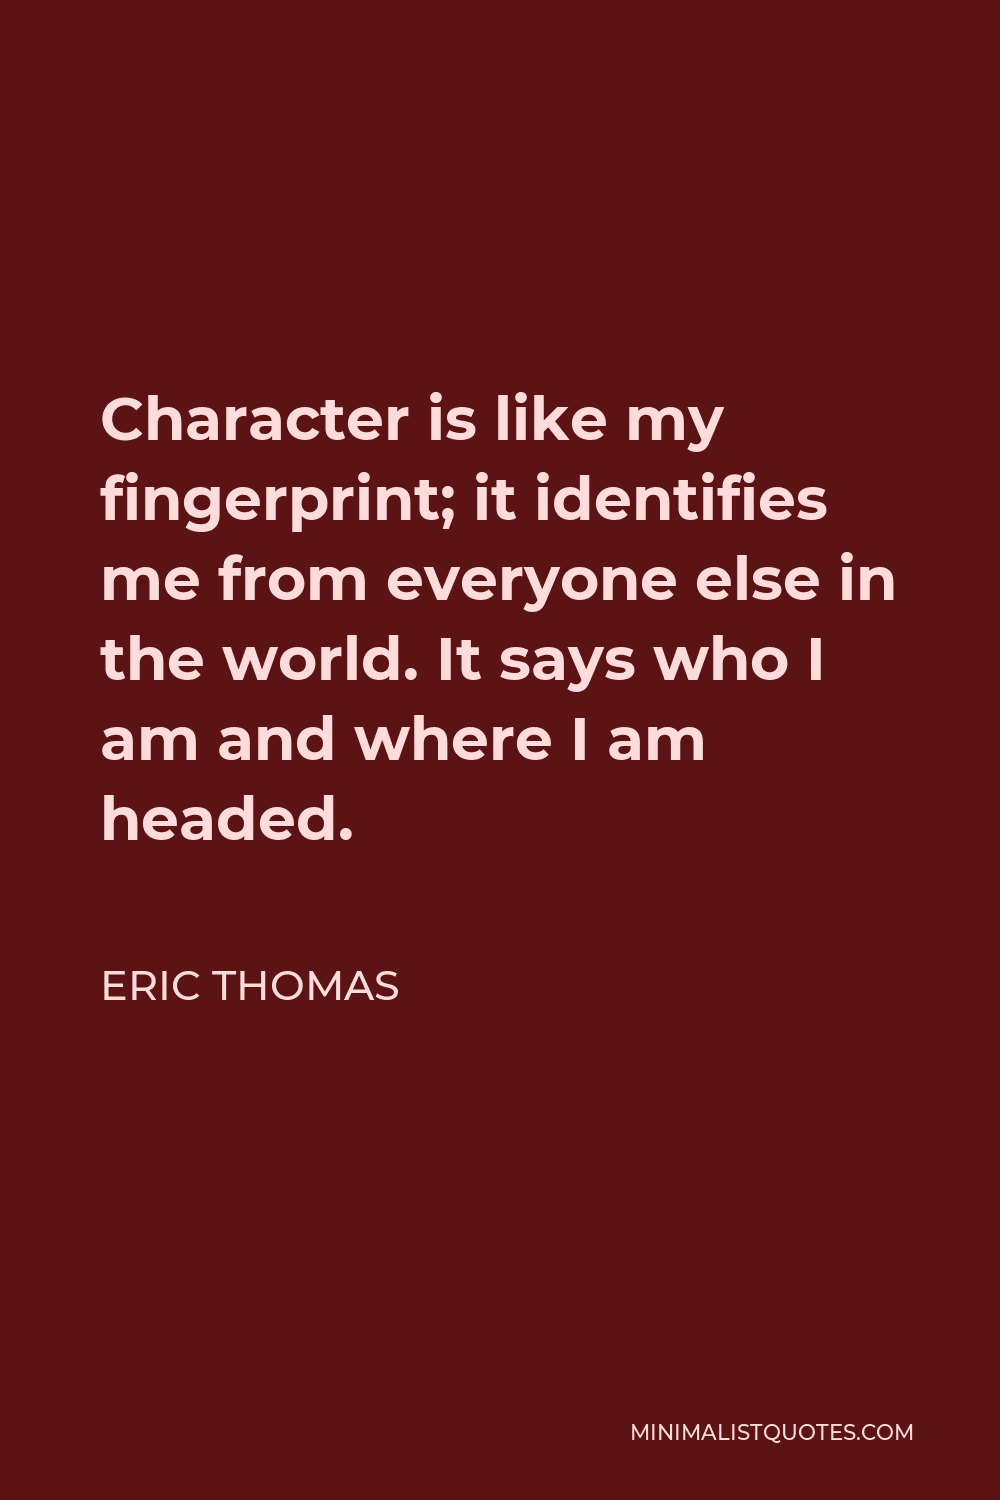 Eric Thomas Quote - Character is like my fingerprint; it identifies me from everyone else in the world. It says who I am and where I am headed.